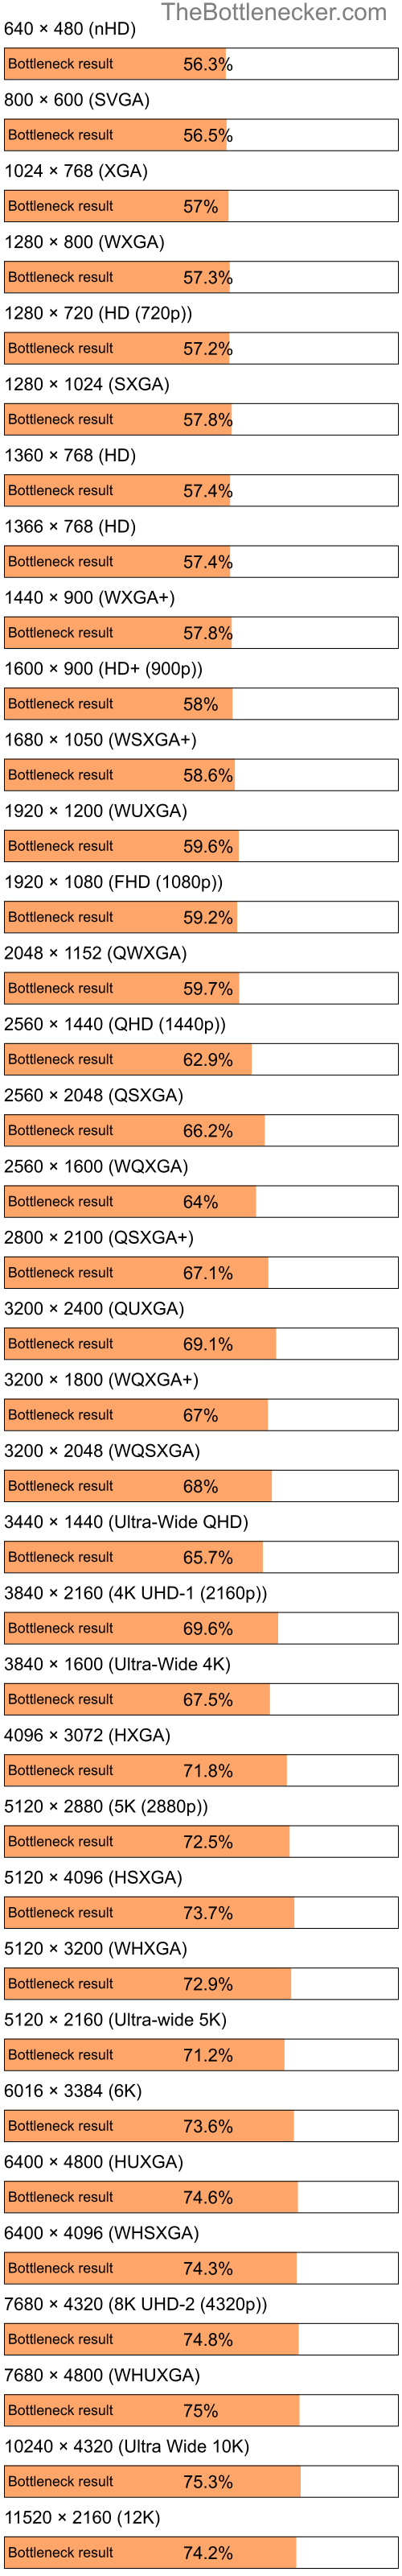 Bottleneck results by resolution for Intel Pentium 4 and NVIDIA GeForce 310M in General Tasks